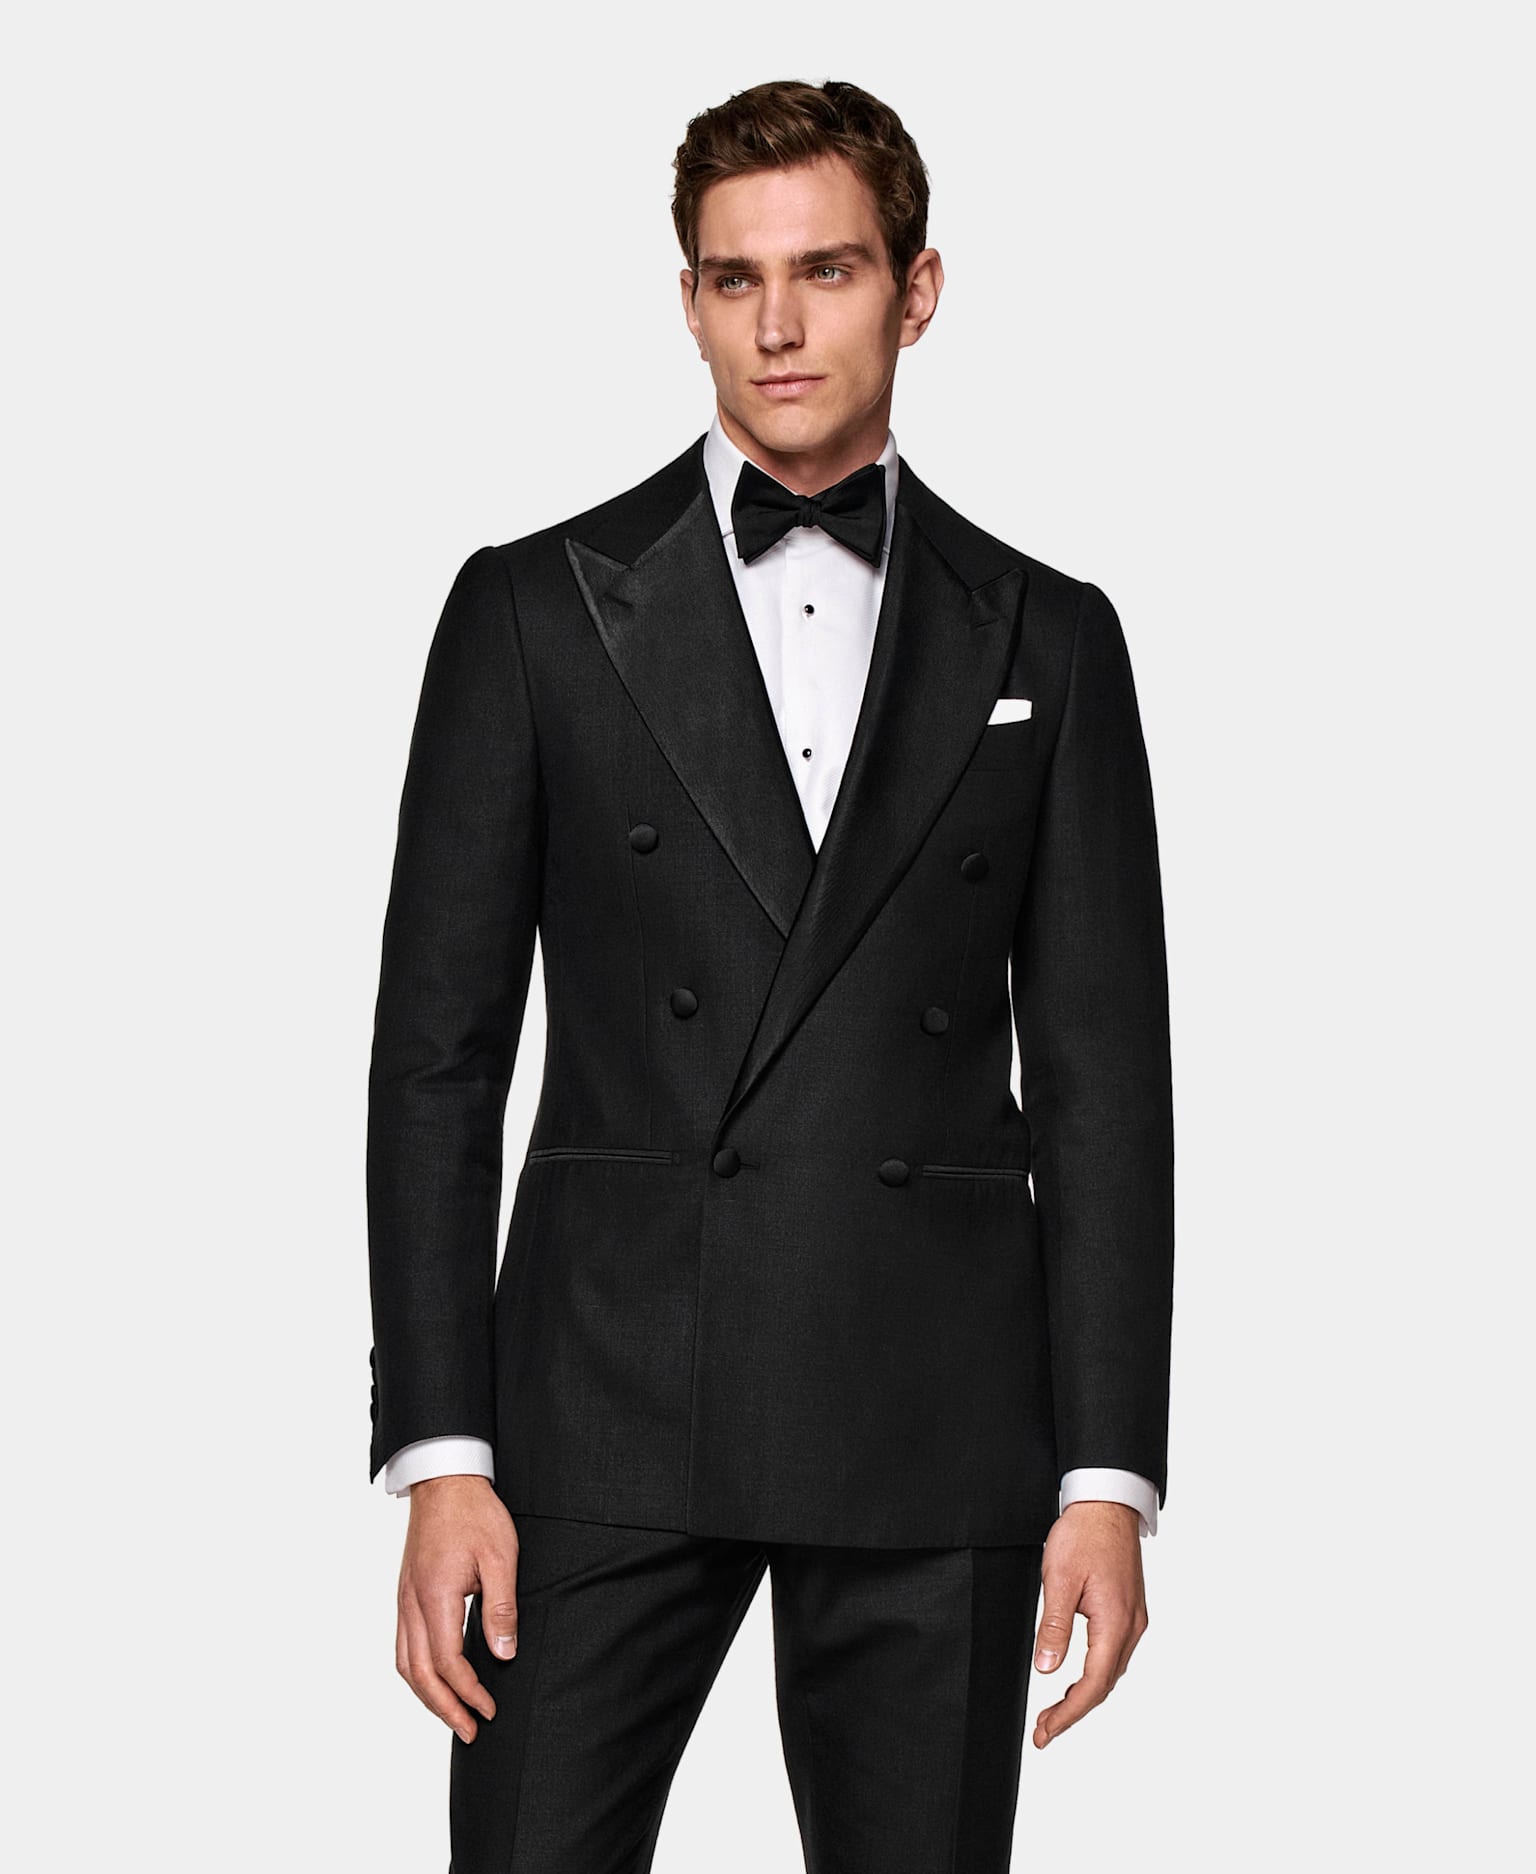 A man wearing a Suitsupply double breasted tuxedo for black tie attire.